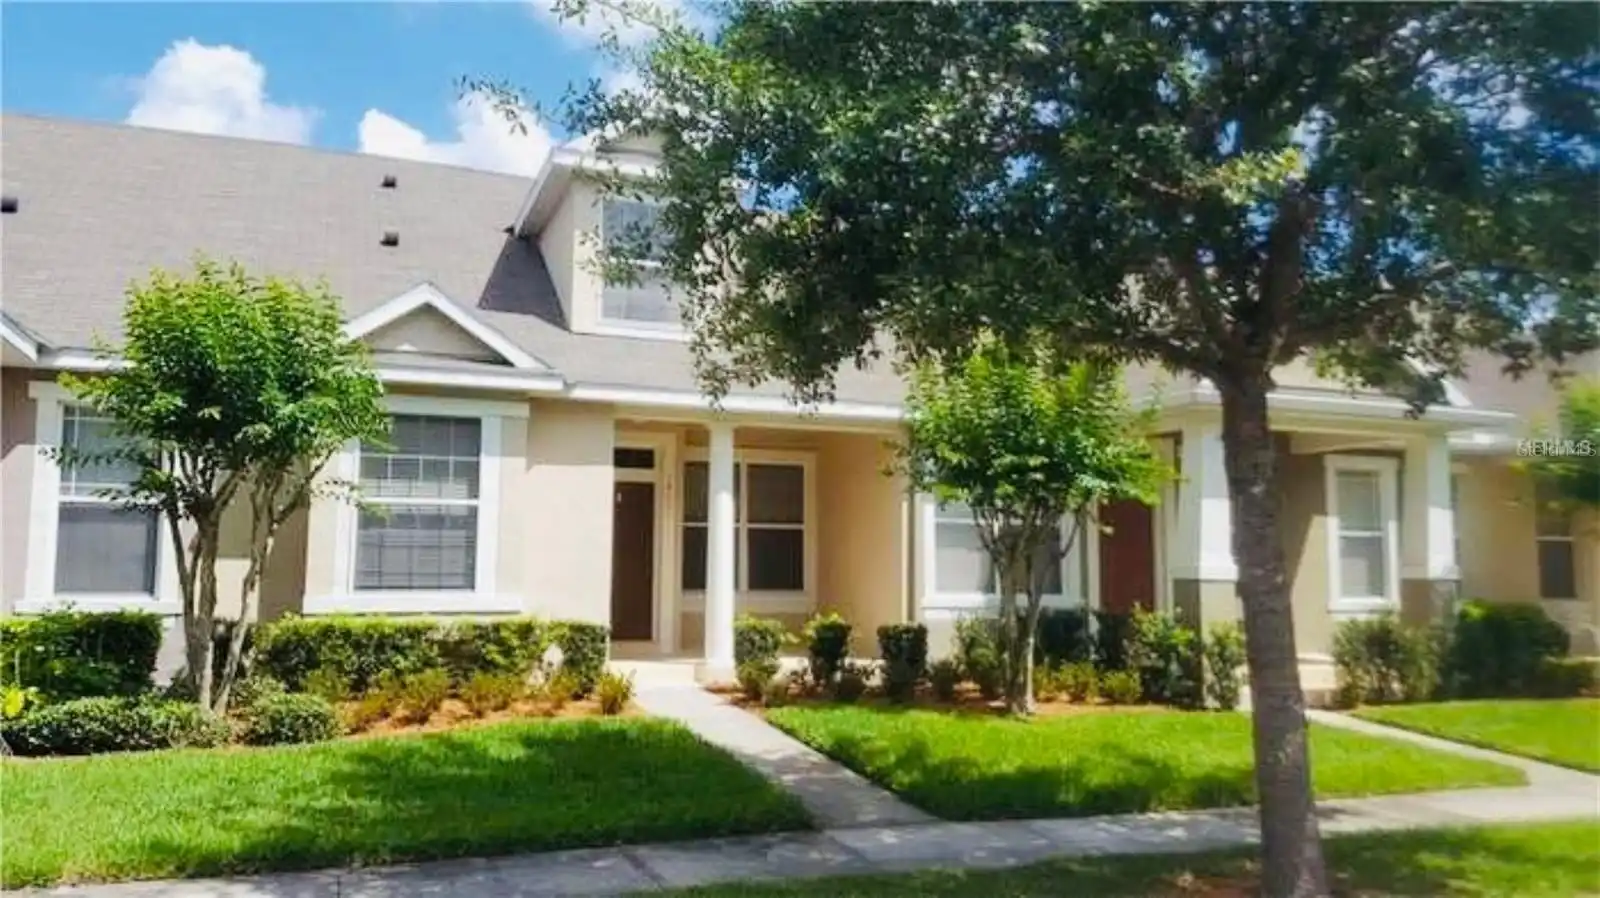 3BR, Residential Lease, 2BA, $2,395
Read More